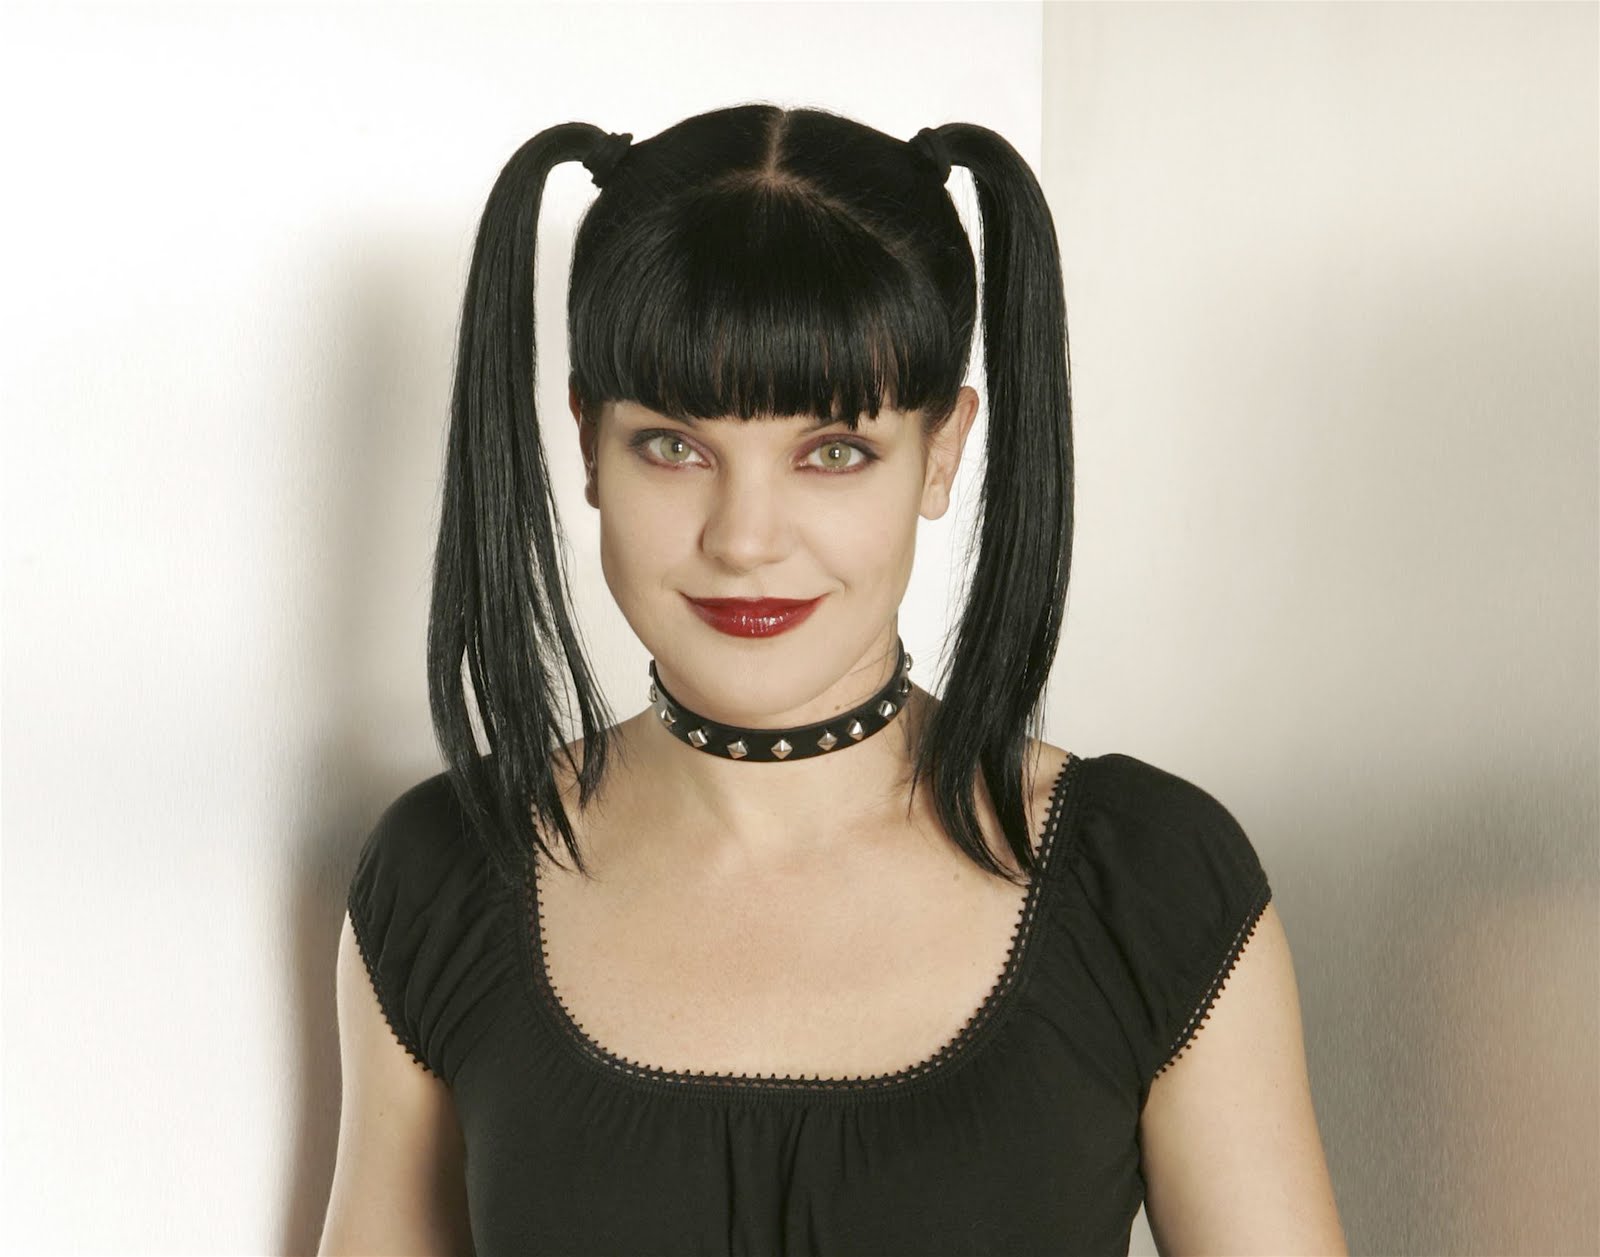 Tit pauley perrette The Lost. 